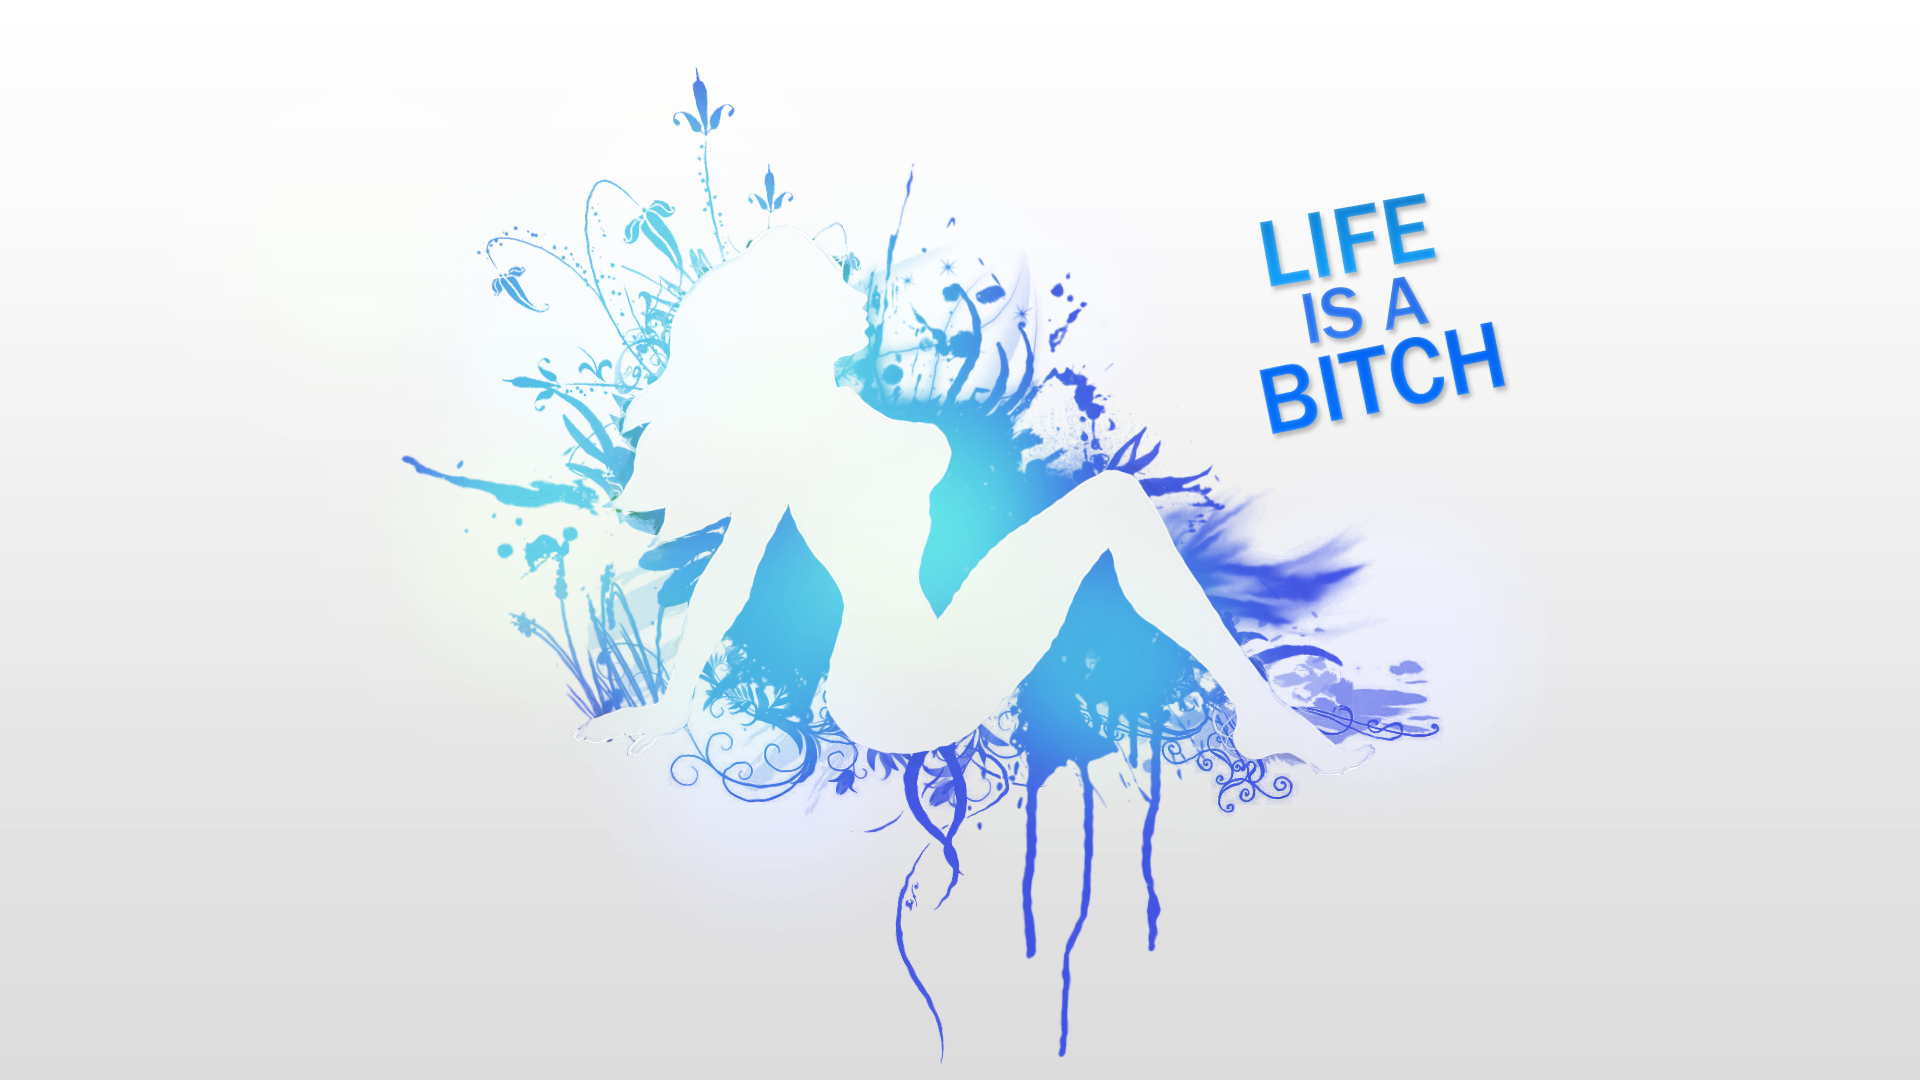 General 1920x1080 life 2D ink bitch cyan women silhouette white background simple background typography